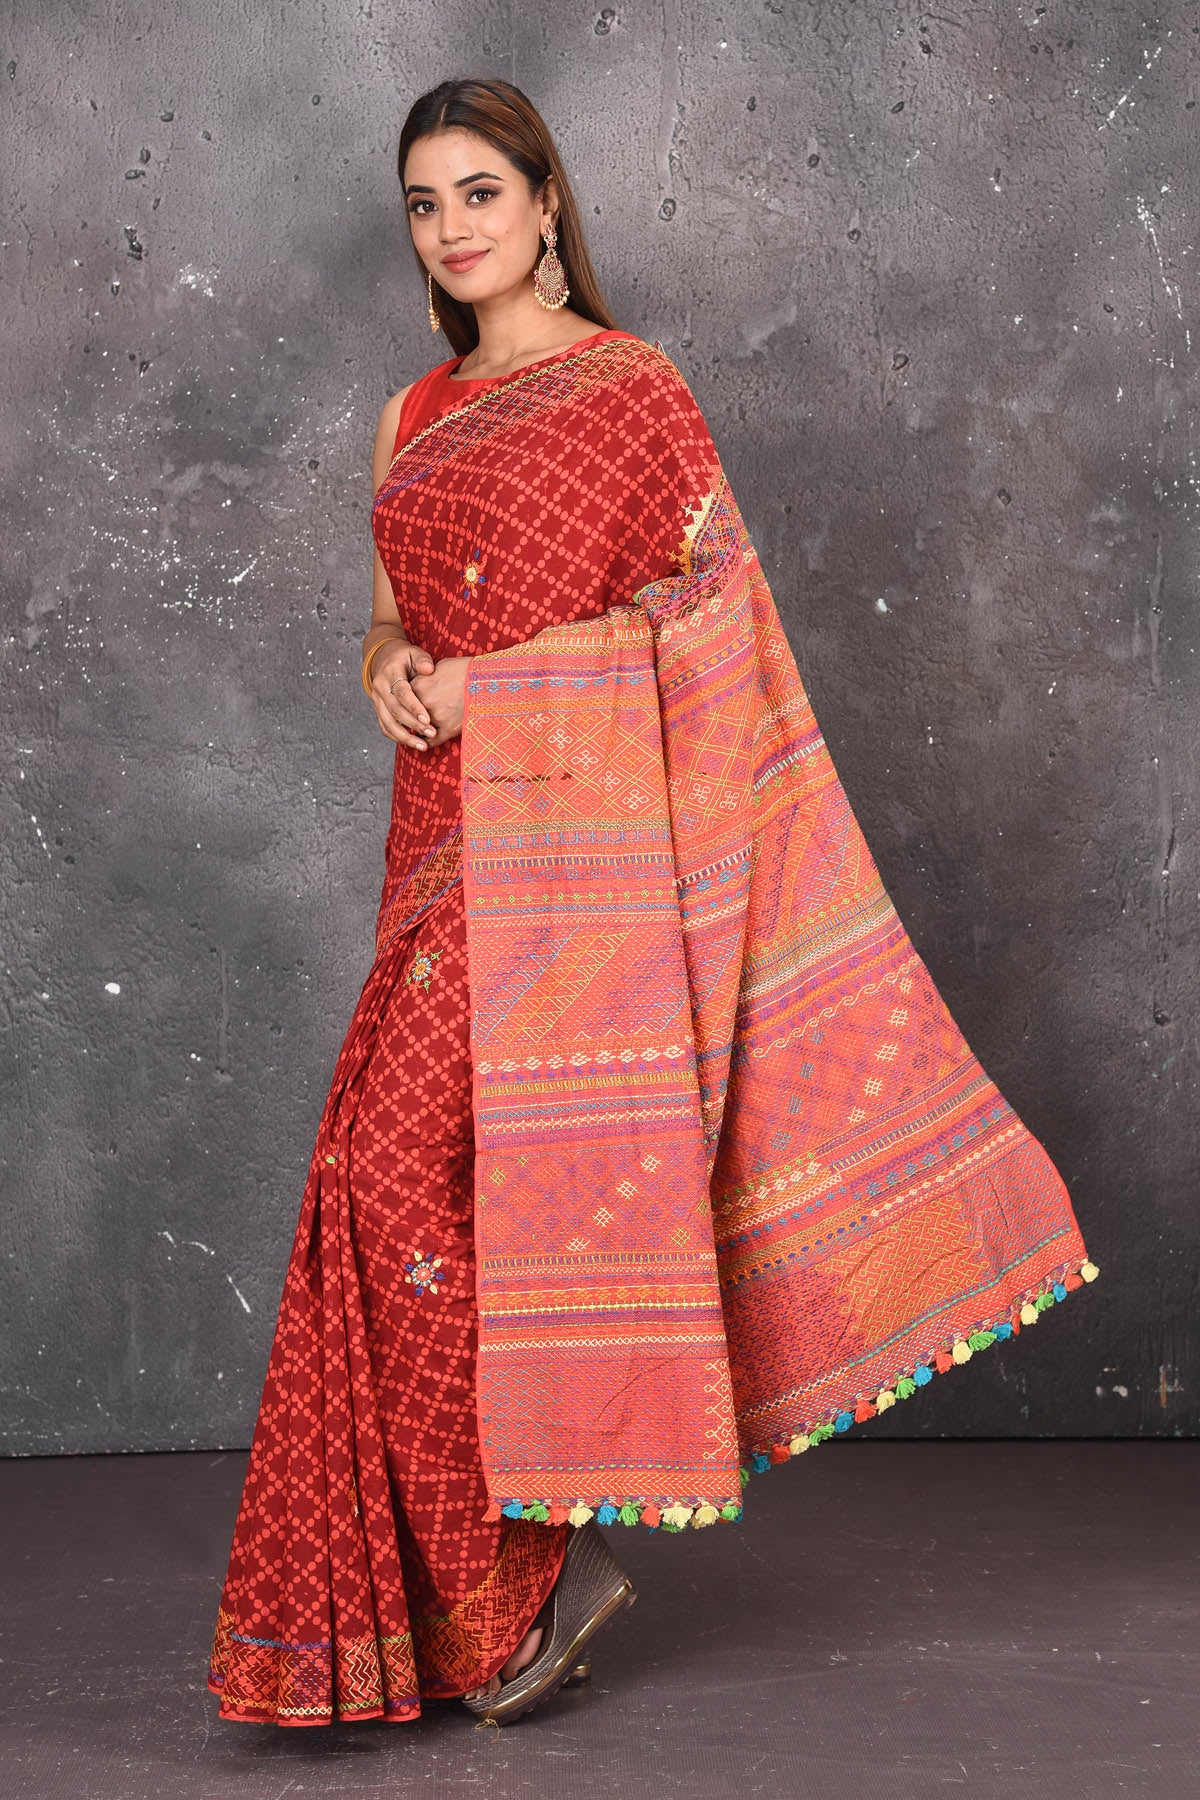 Shop this classy red hand painted madhubani cotton saree online in USA. Perfect to be worn as part of your everyday work wear, with this hand-painted red Madhubani saree, elegance meets traditional. Add this designer Lambani embroidery designer saree with colored tassels to your collection from Pure Elegance Indian Fashion Store in USA.- Full view with folded hands.